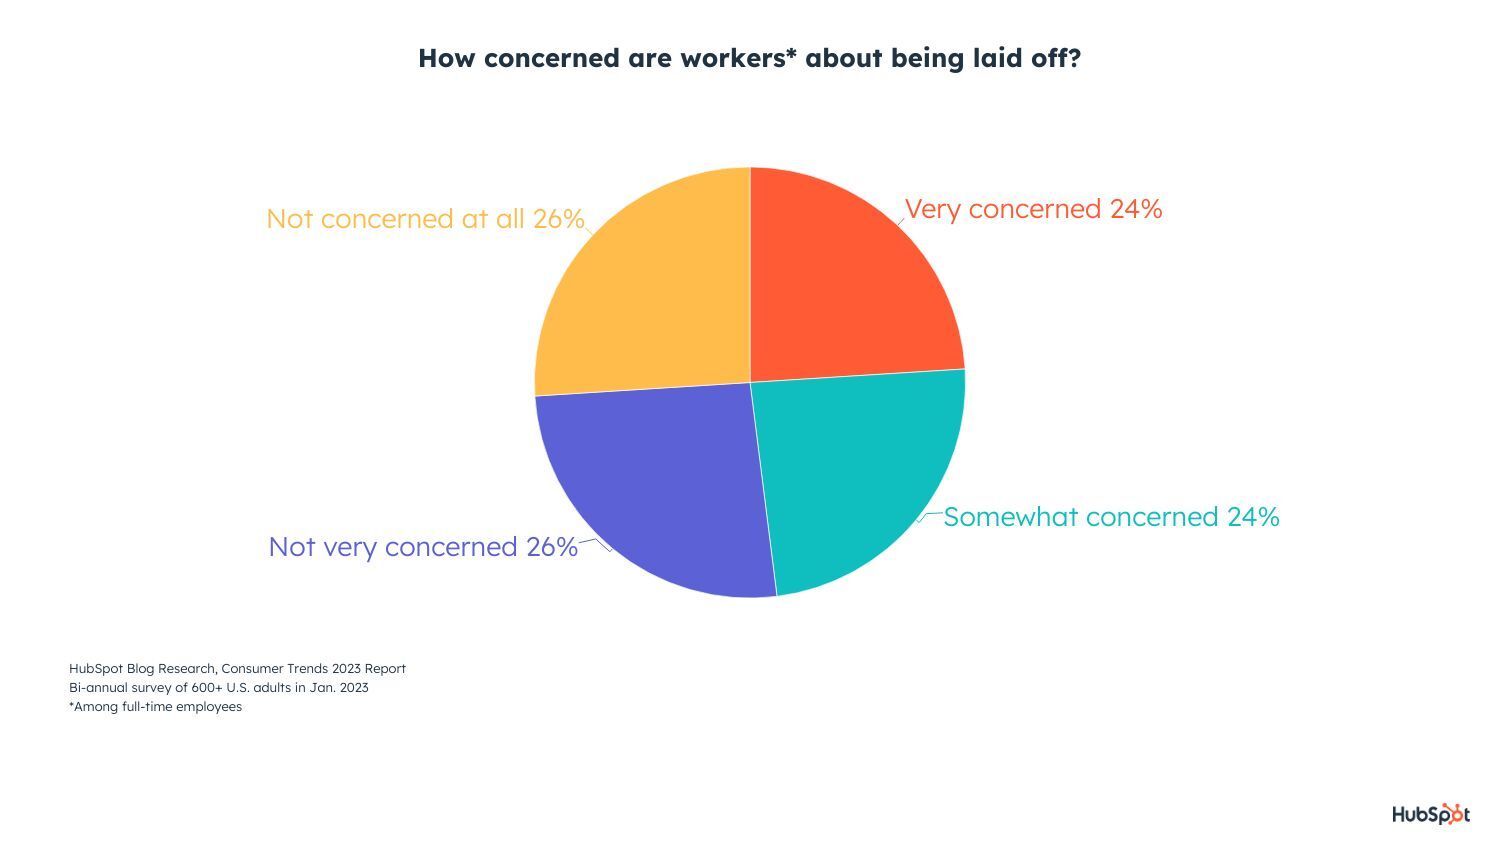 most consumers are concerned about being laid off